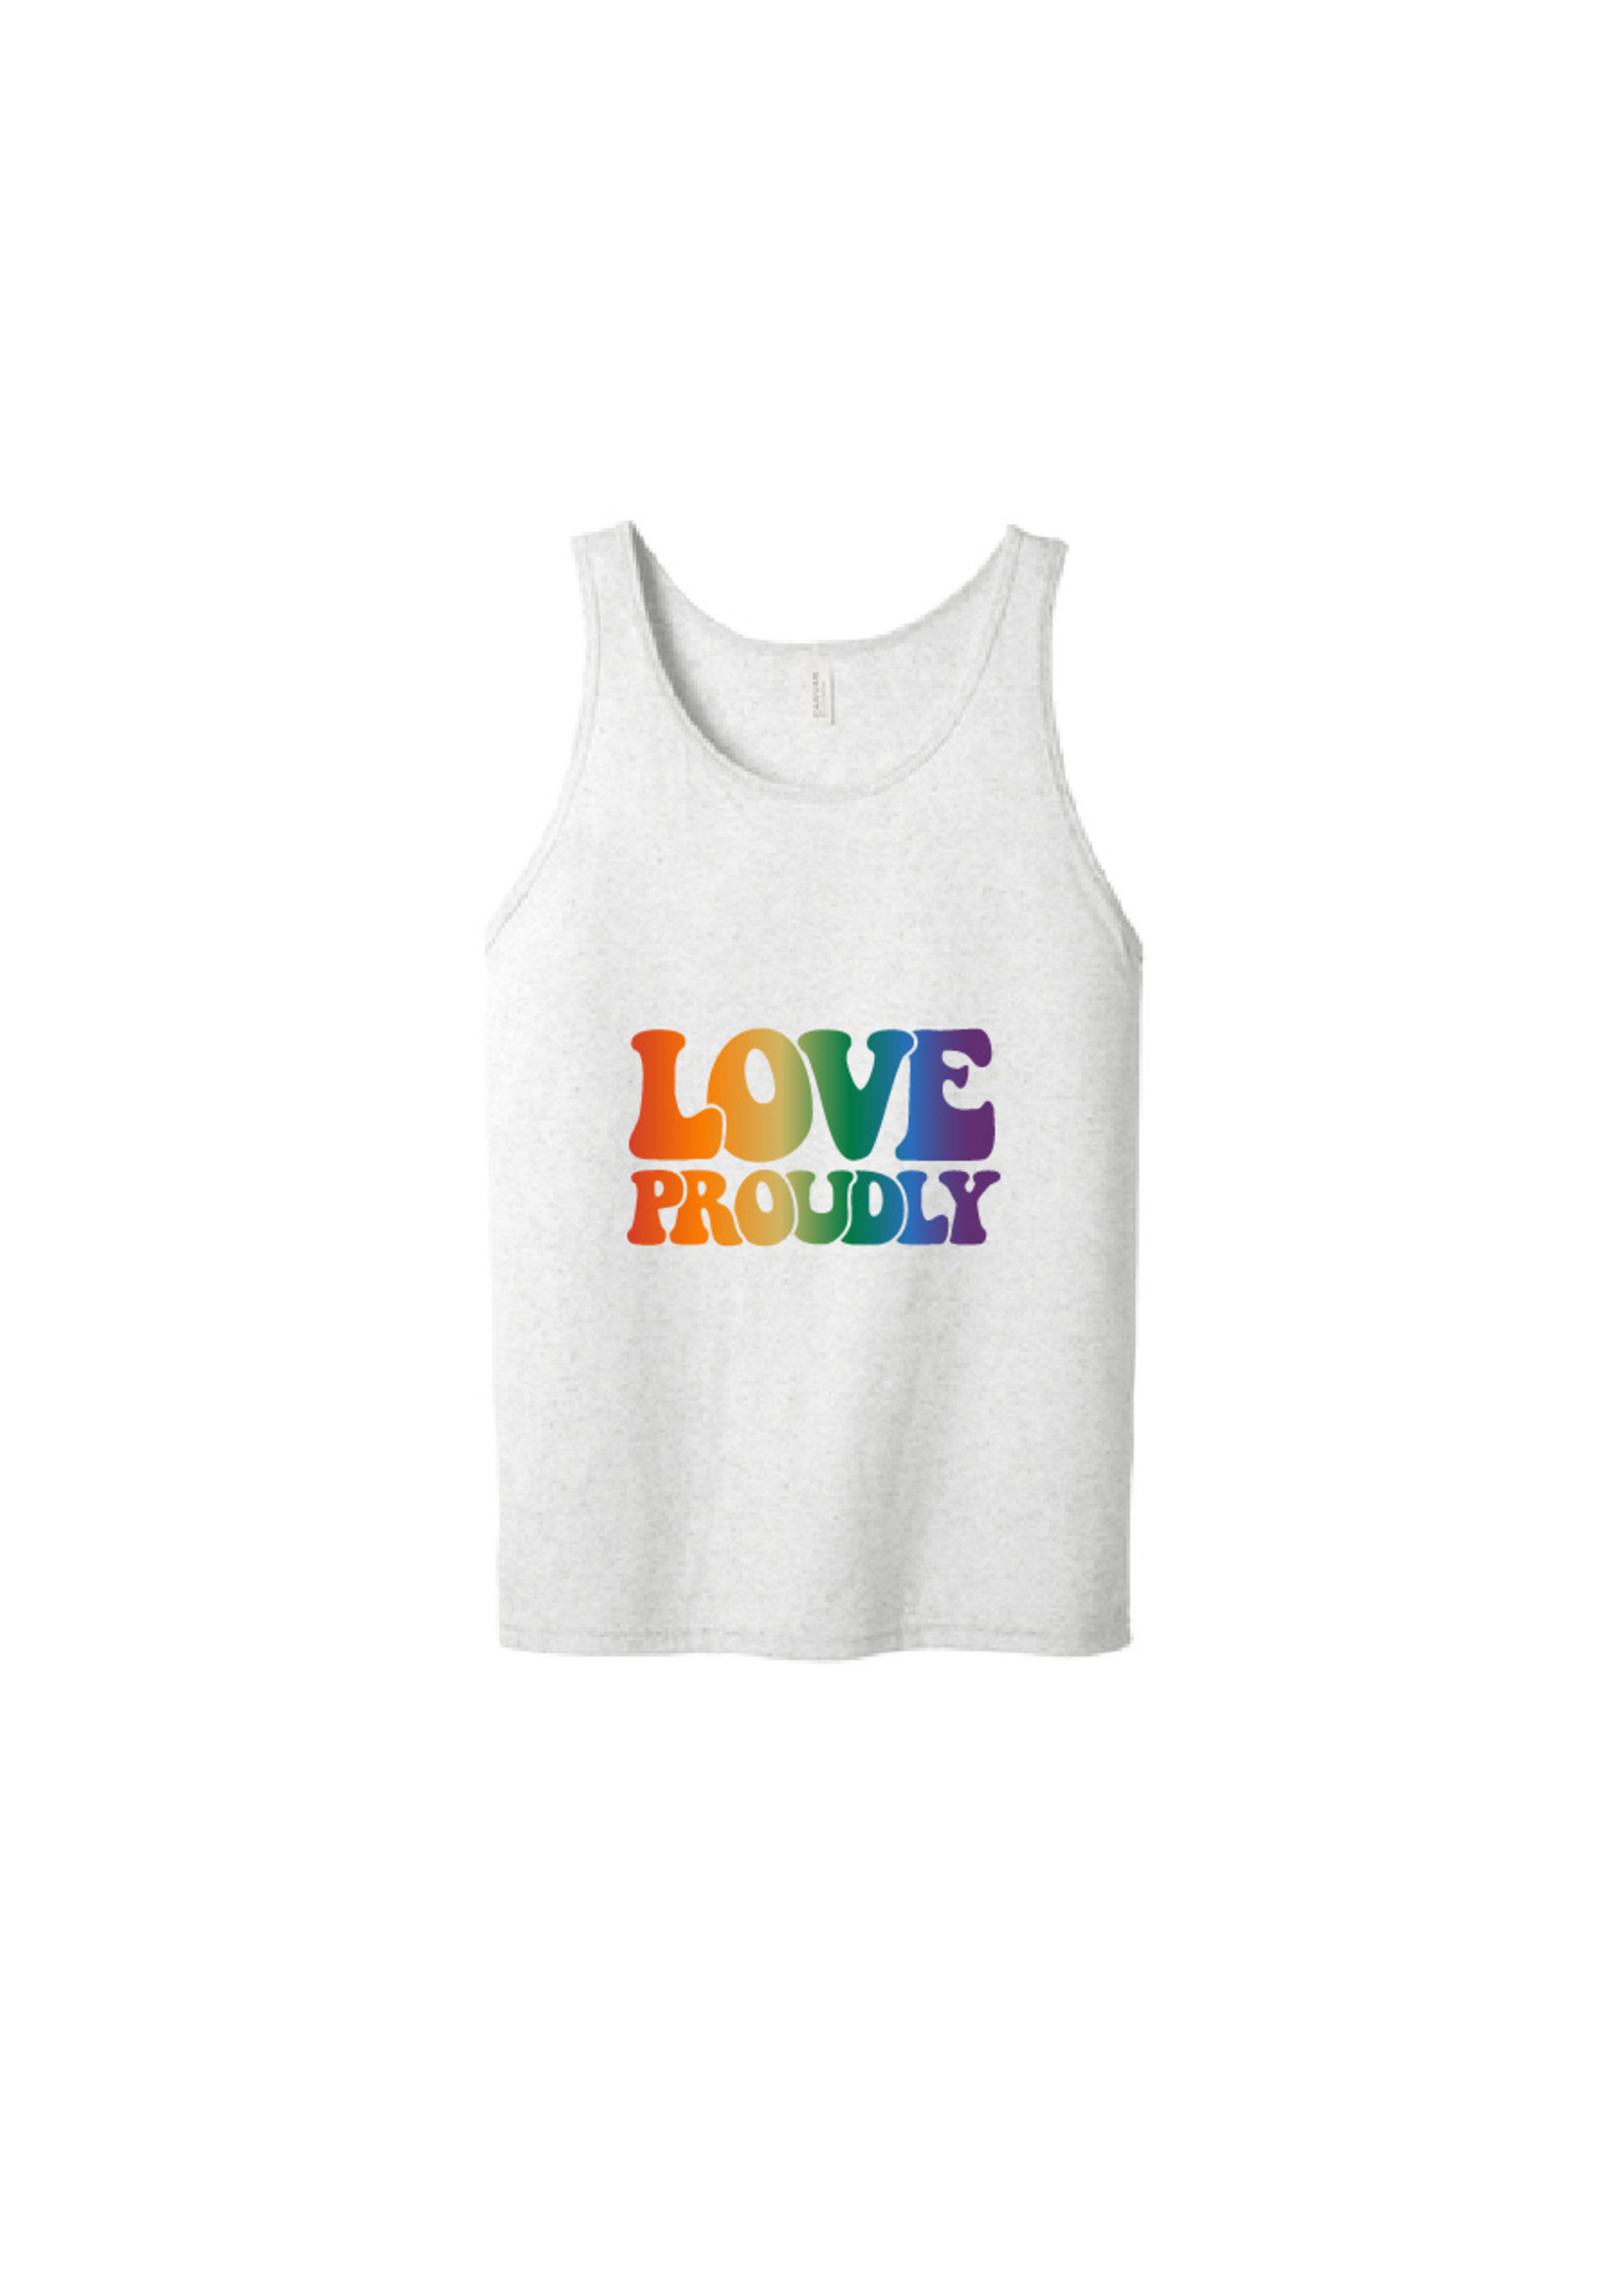 Tangled Up In Hue Love Proudly - Unisex Tank Top